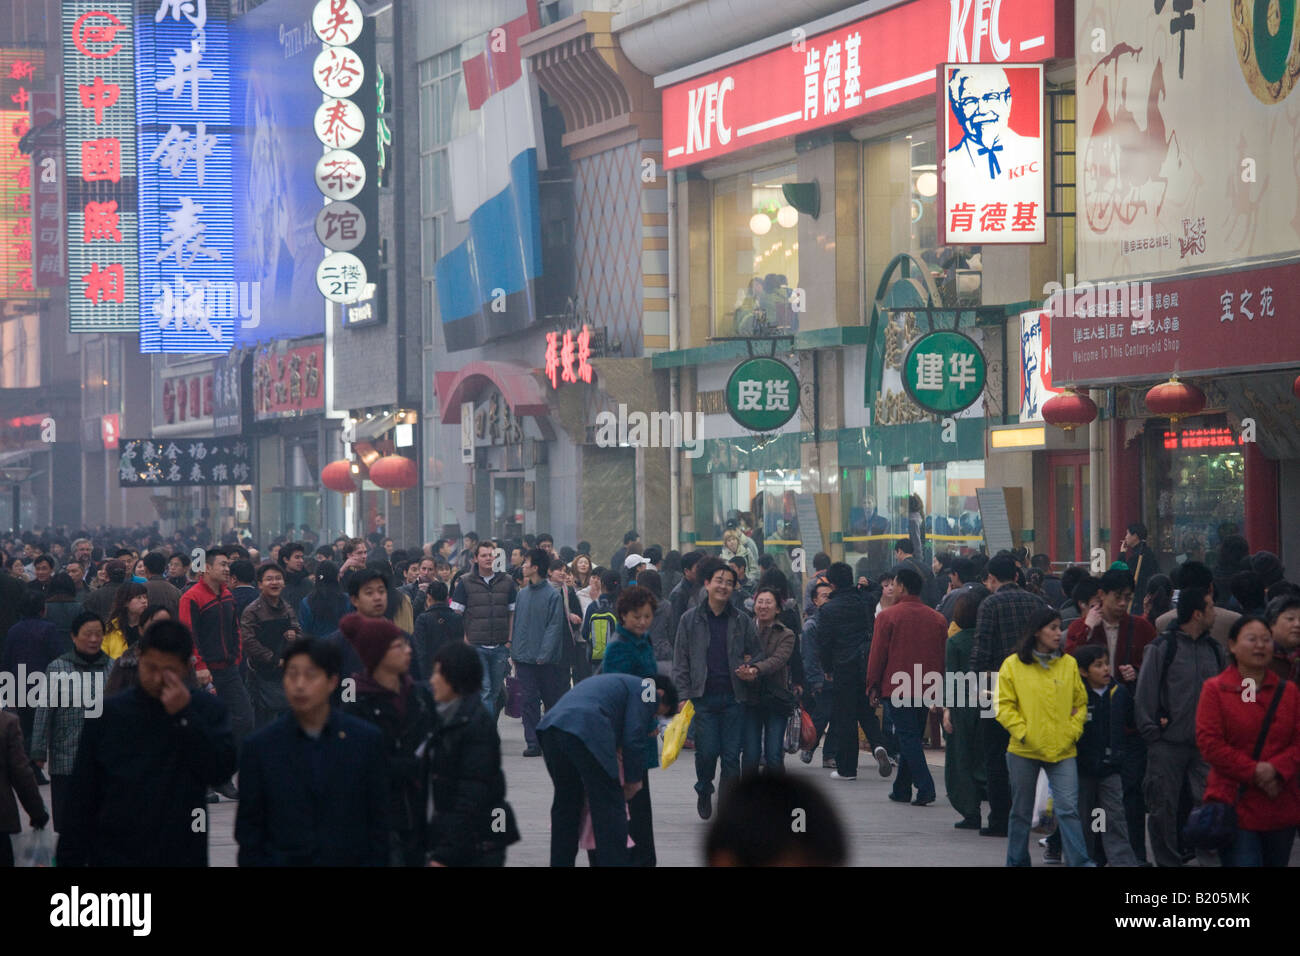 Pedestrians crowded Wangfujing street and shops in smoggy Central Beijing China Stock Photo